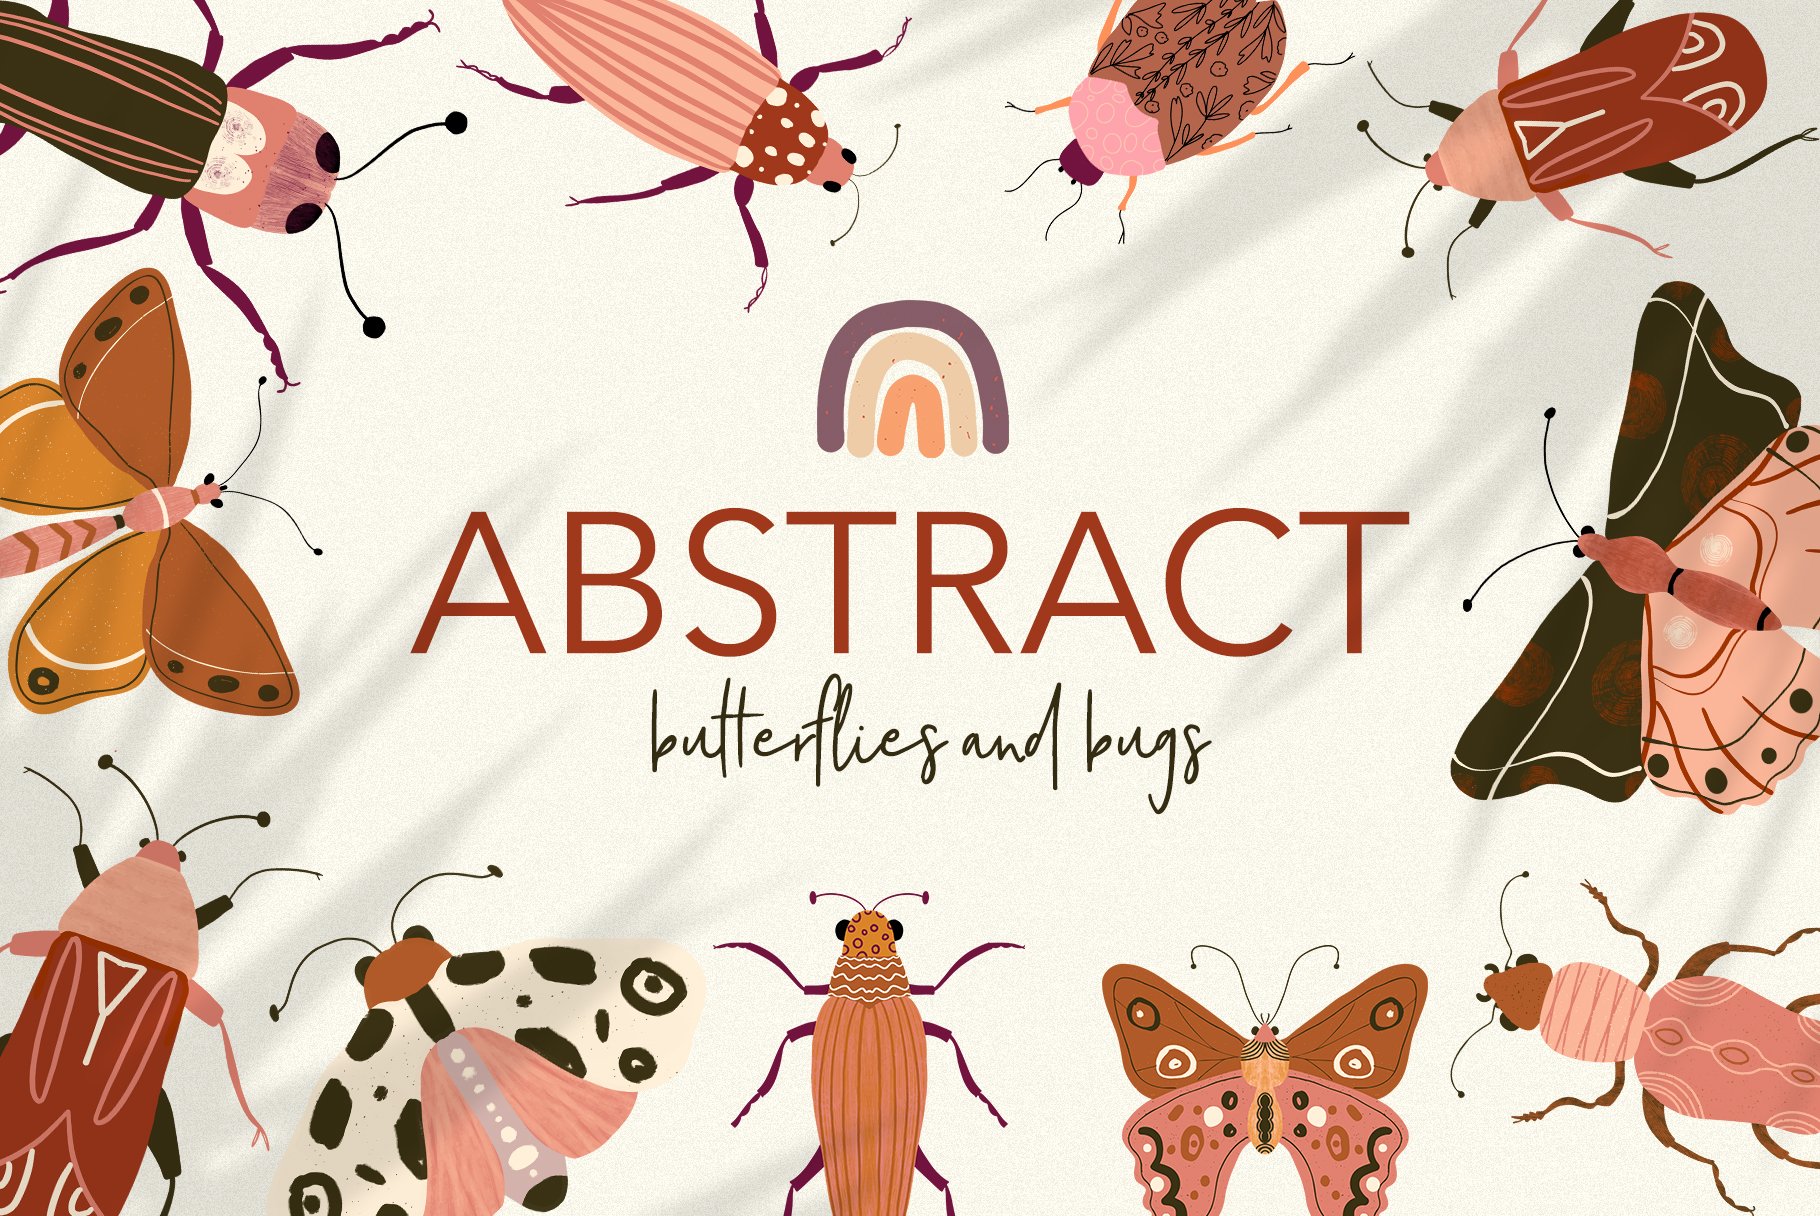 Abstract Butterflies and Bugs cover image.